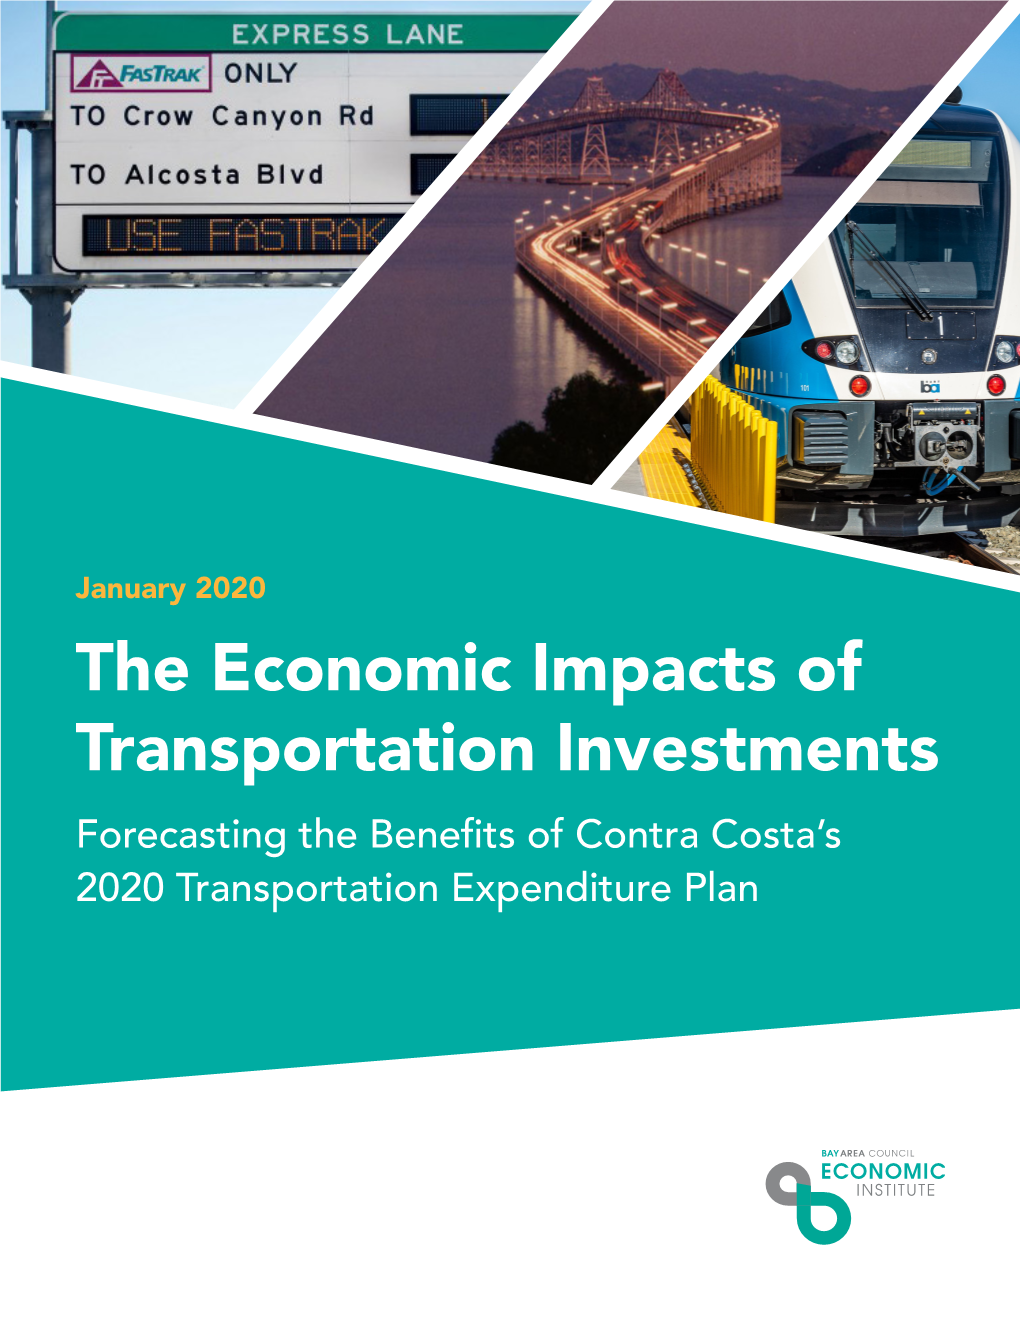 The Economic Impacts of Transportation Investments Forecasting the Benefits of Contra Costa’S 2020 Transportation Expenditure Plan Contents